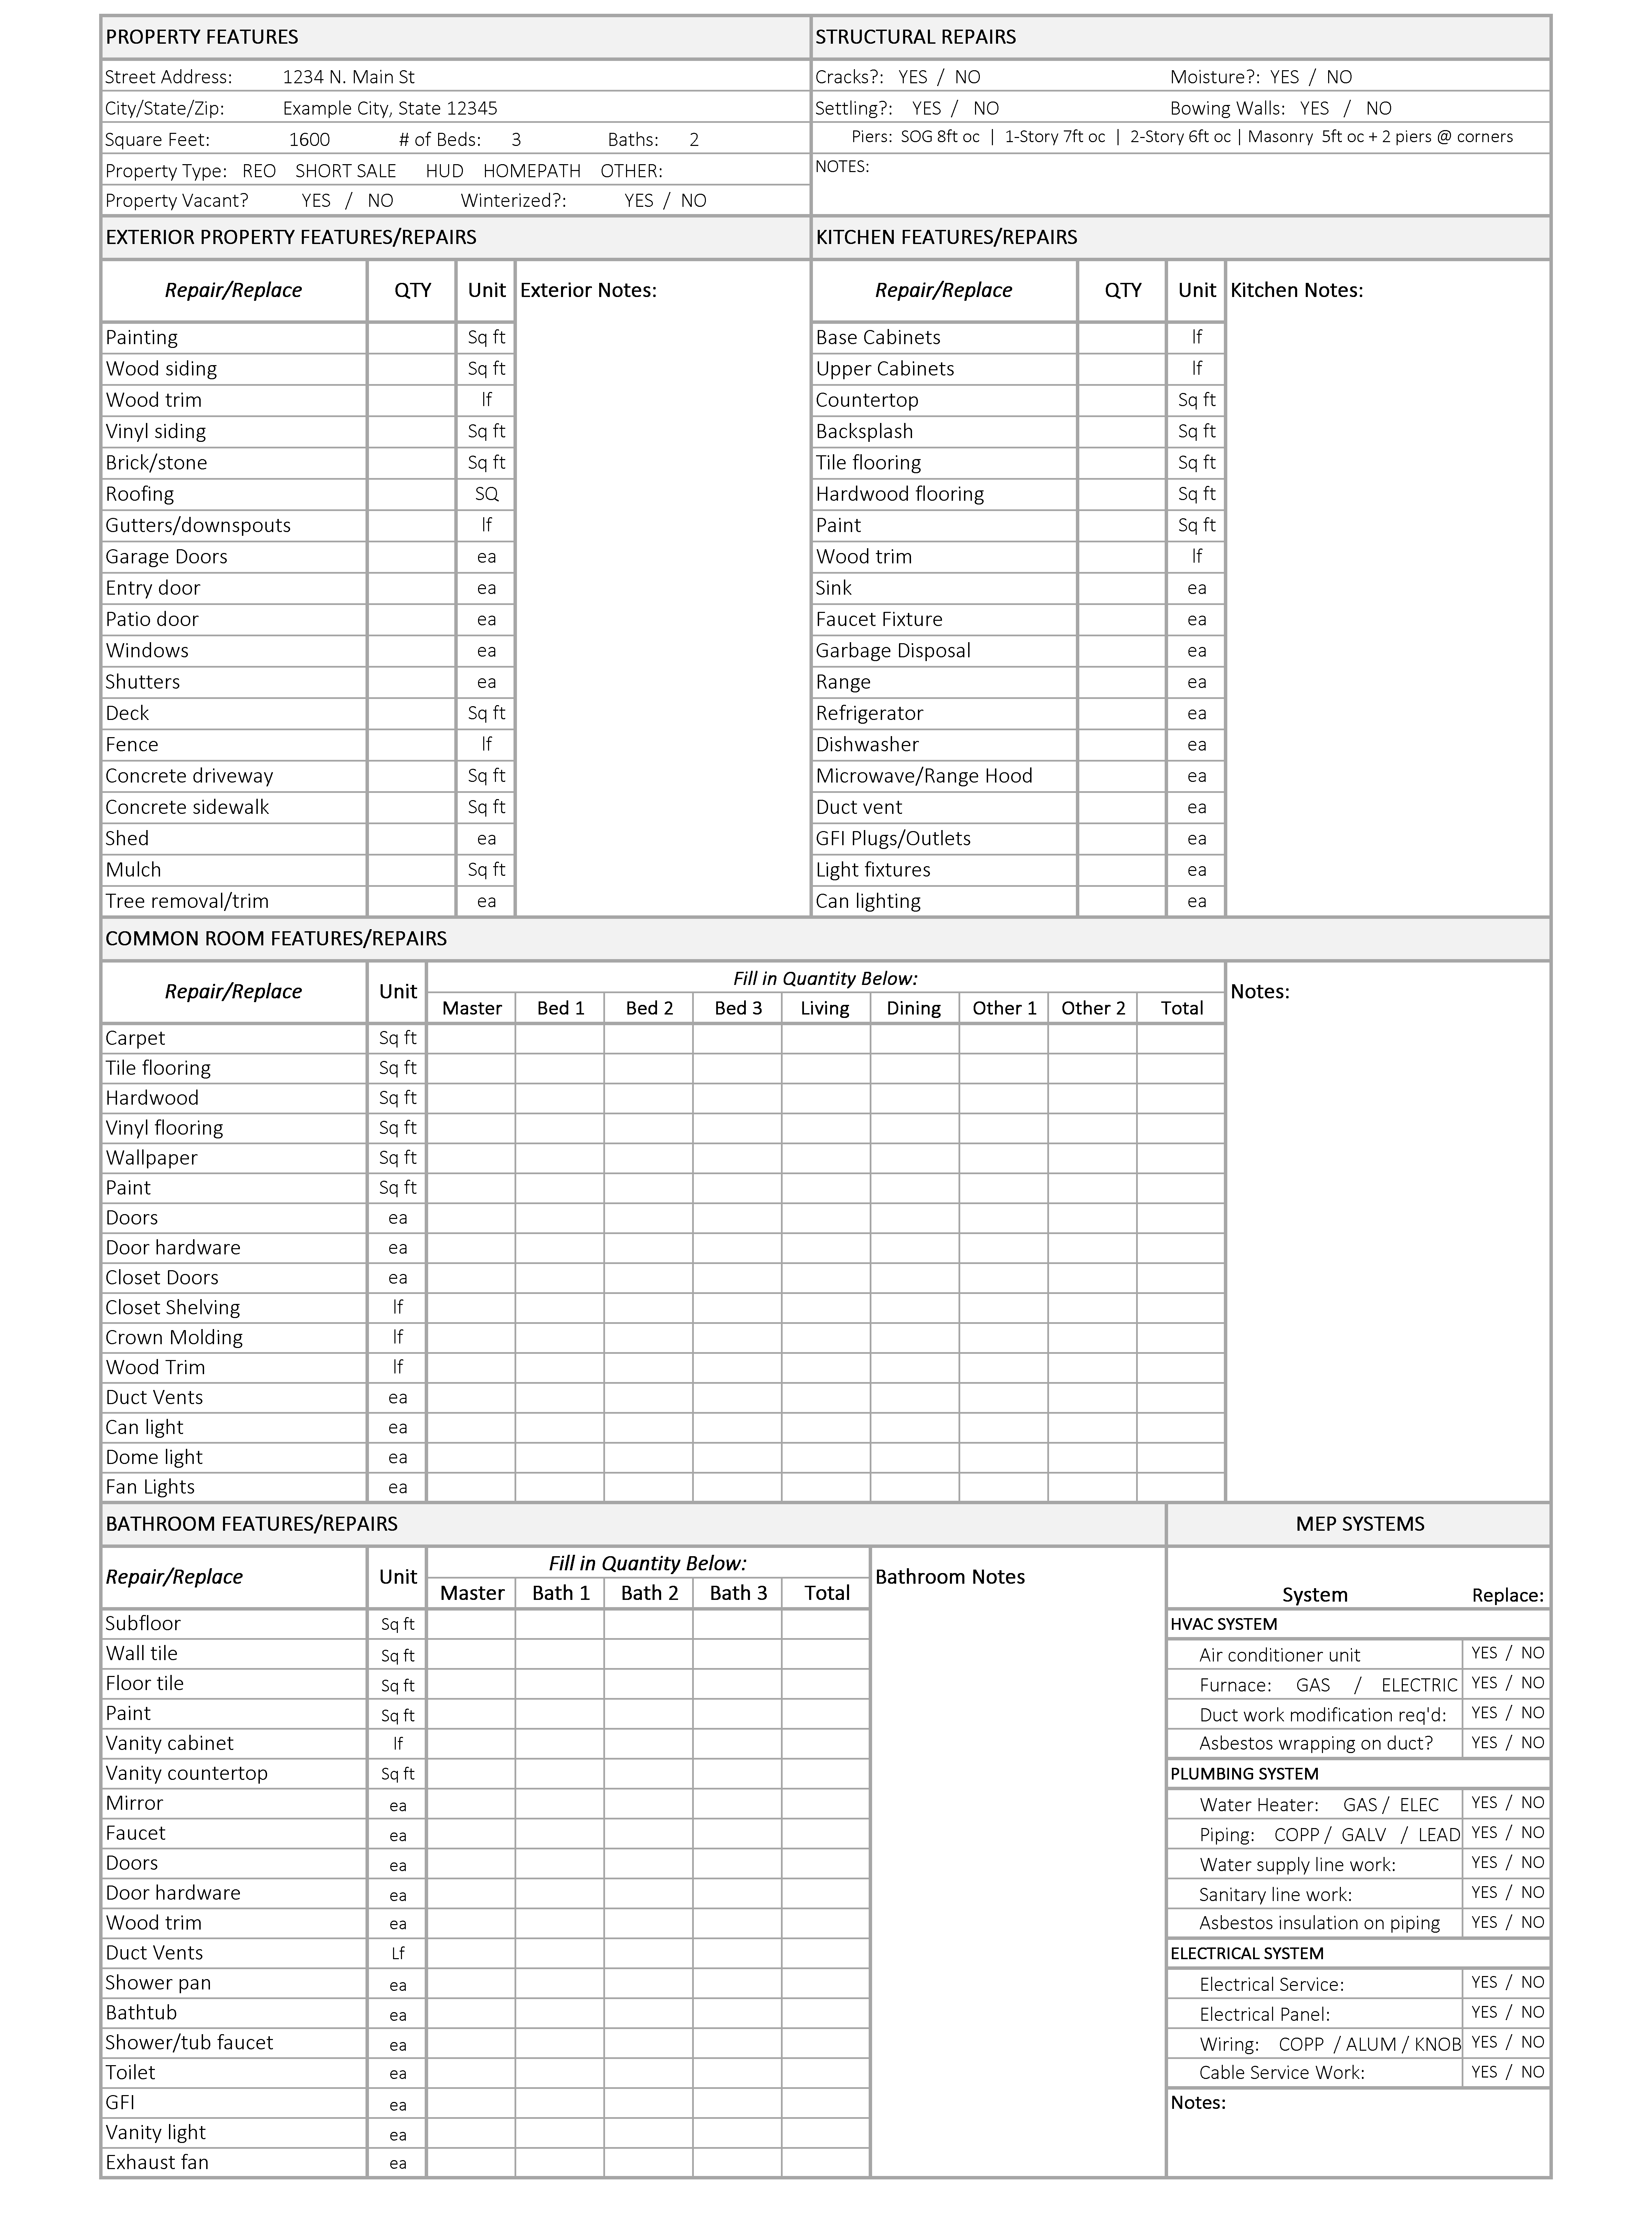 Deal Analyzer Spreadsheet Download Pertaining To House Flipping Spreadsheet  Rehabbing And House Flipping